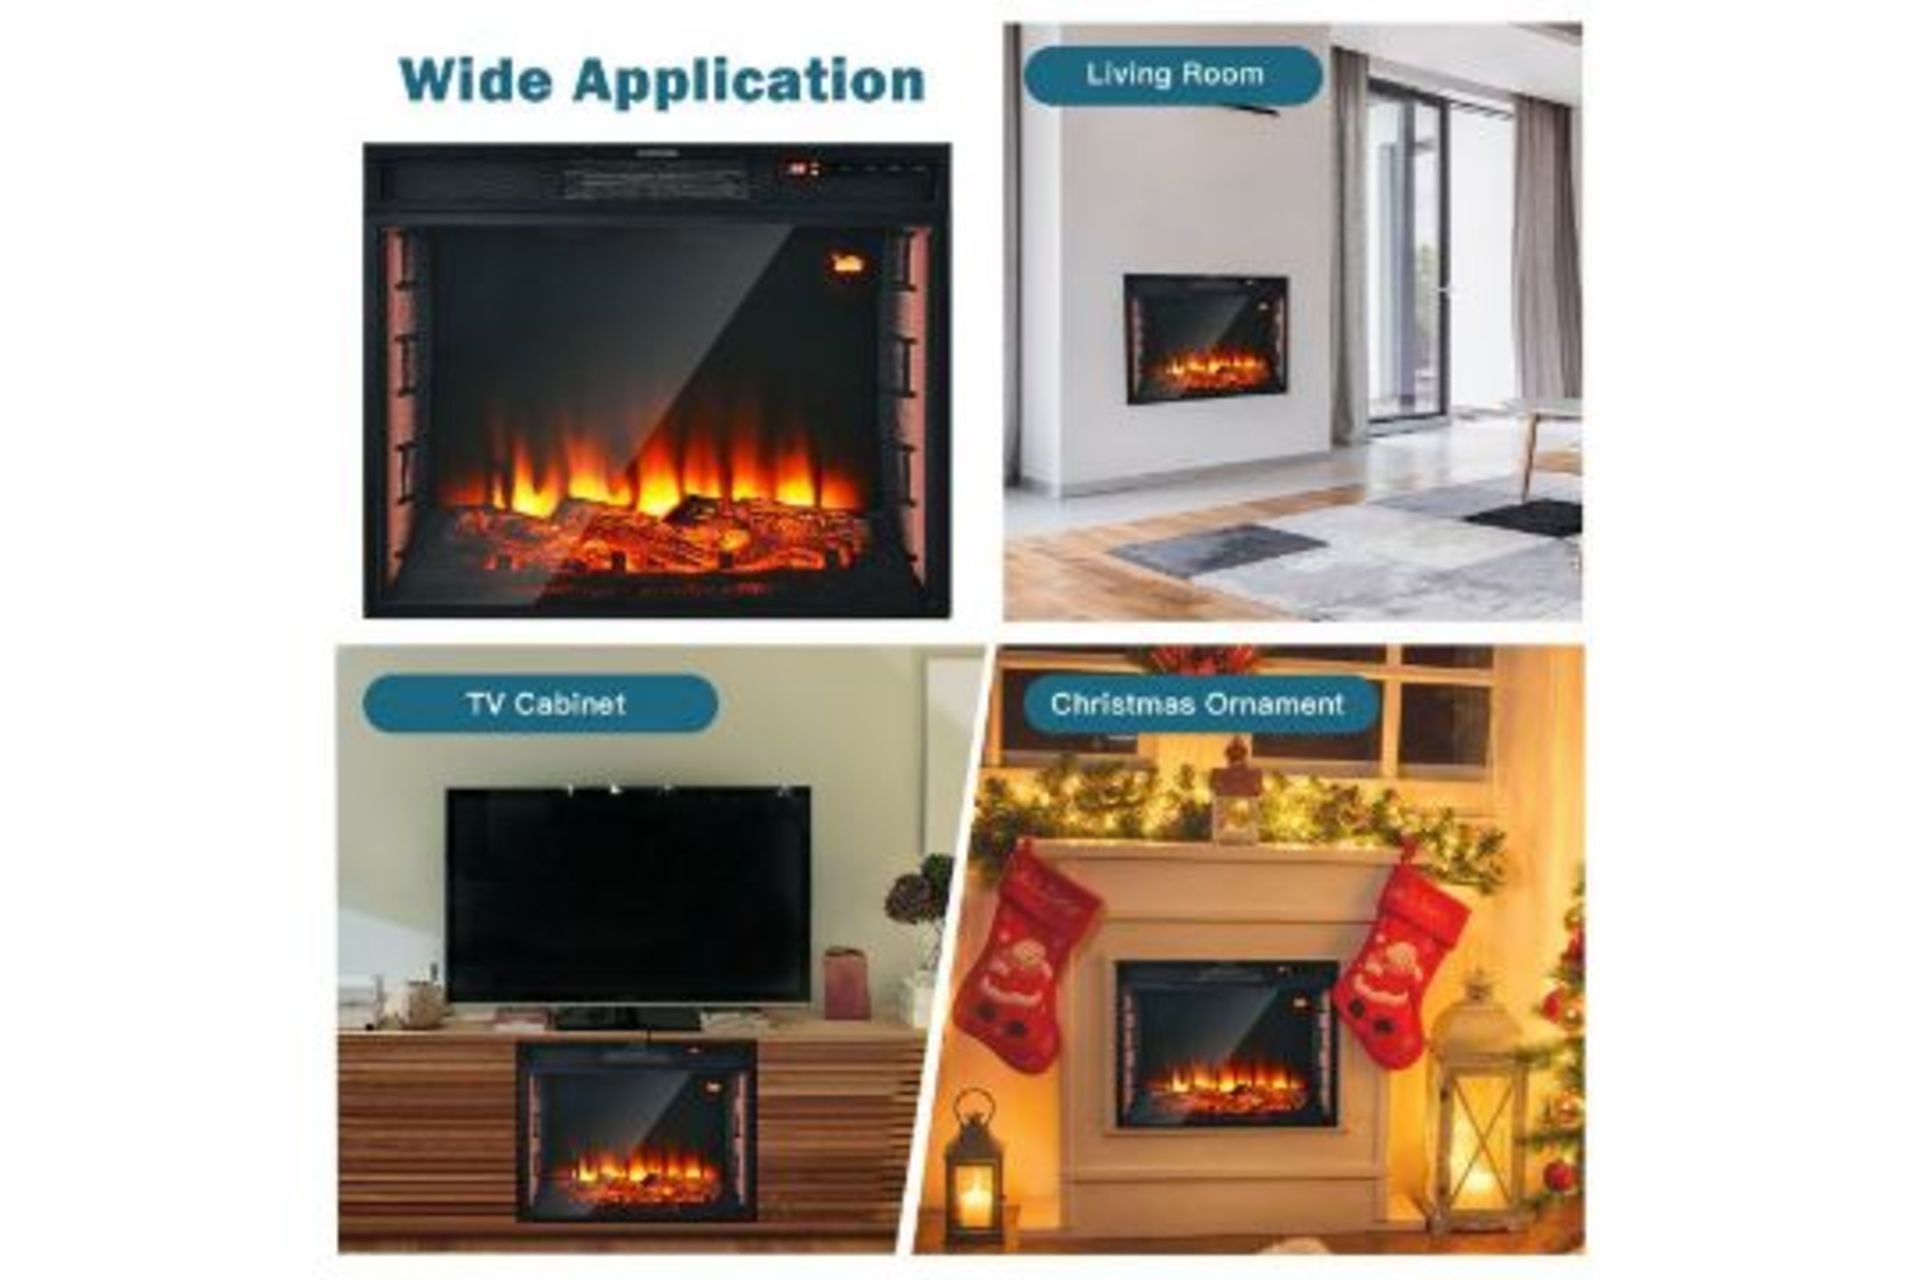 New & Boxed Marsily Marlow Home Co. 60cm Electric Fireplace. RRP £299. Complete the coziness of your